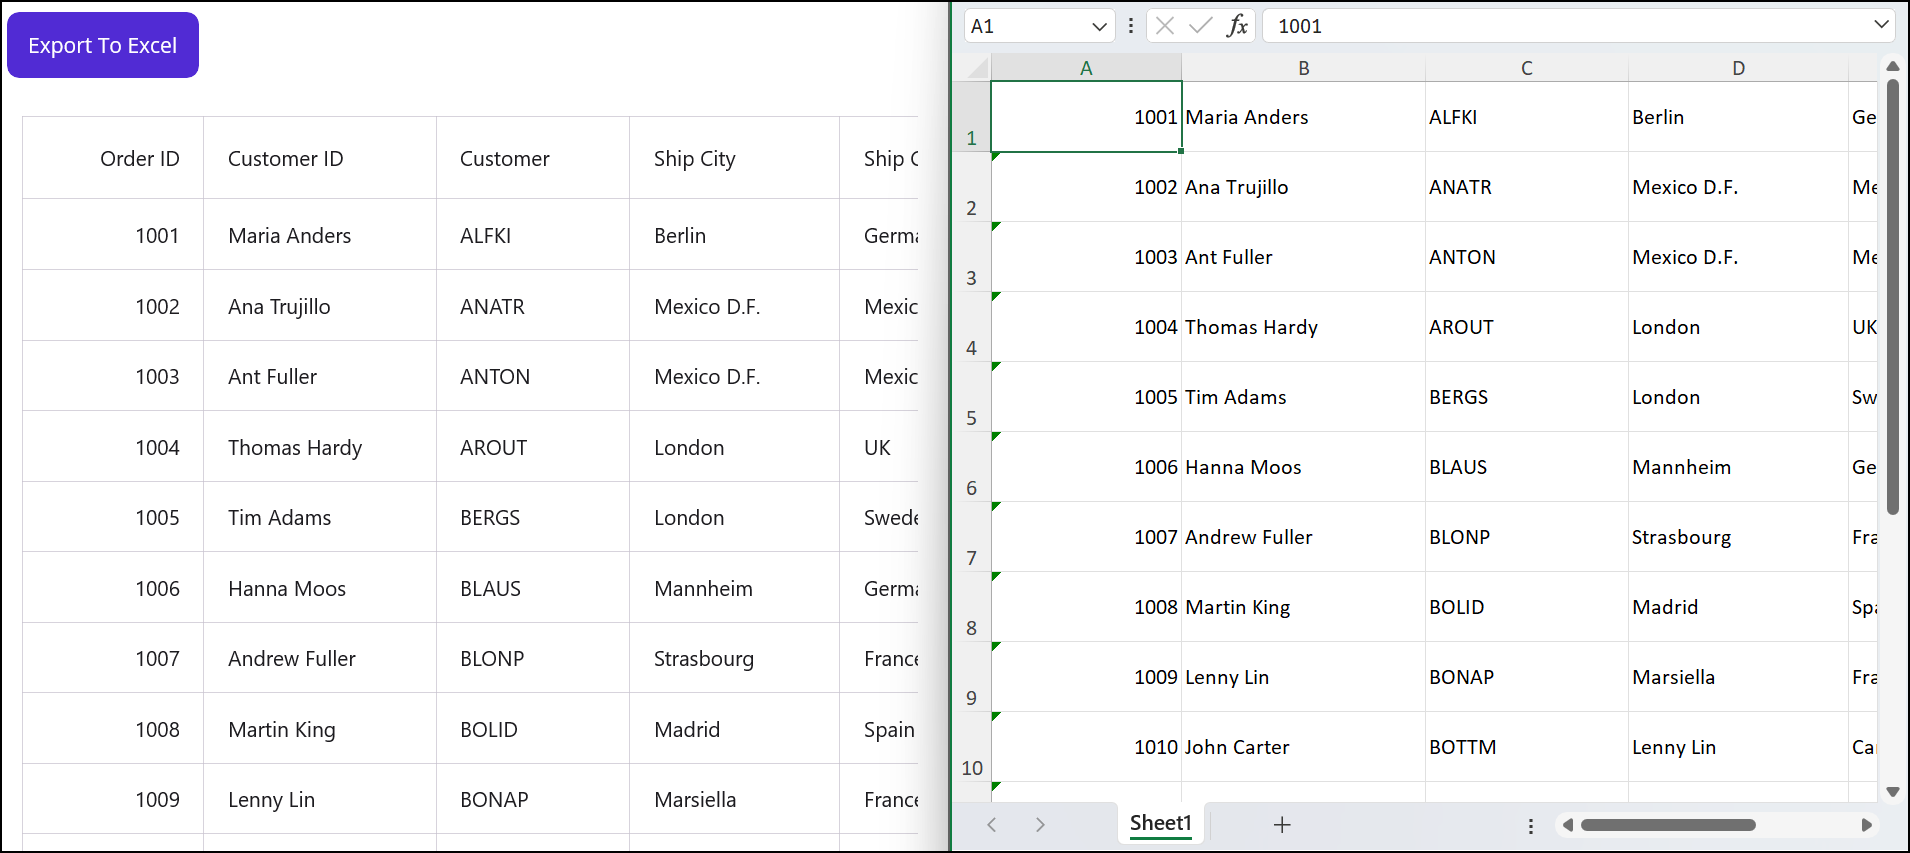 Exporting grid data without headers to an Excel document